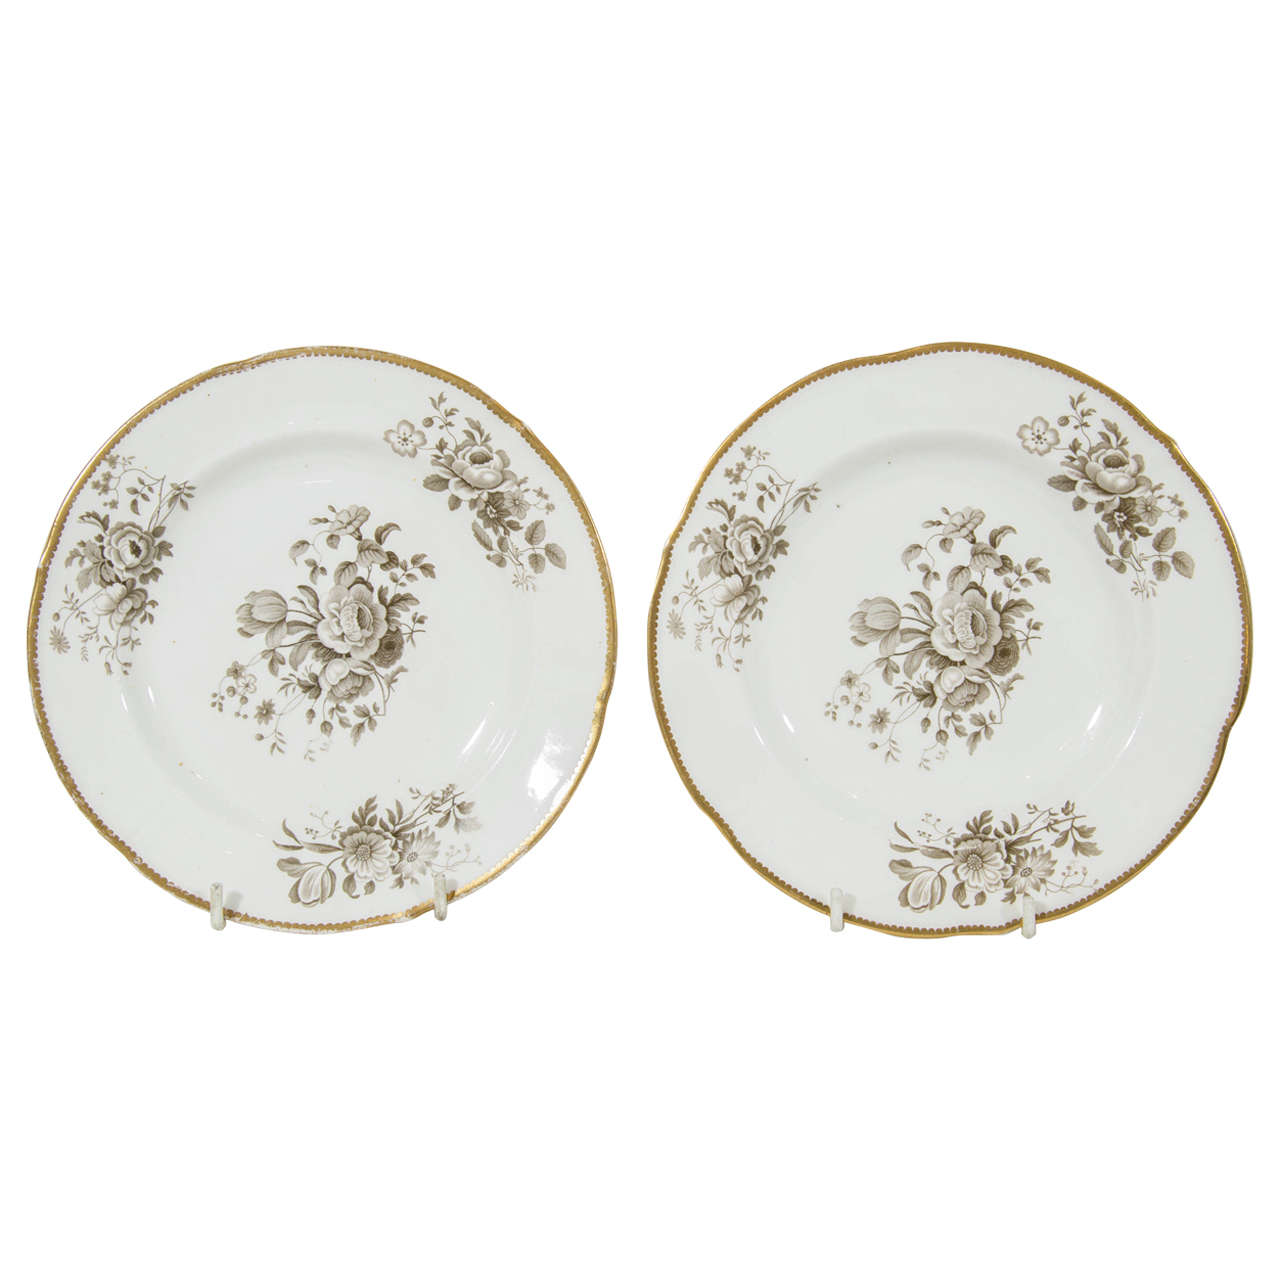 Antique Dishes Set In Glass - 2 For Sale on 1stDibs